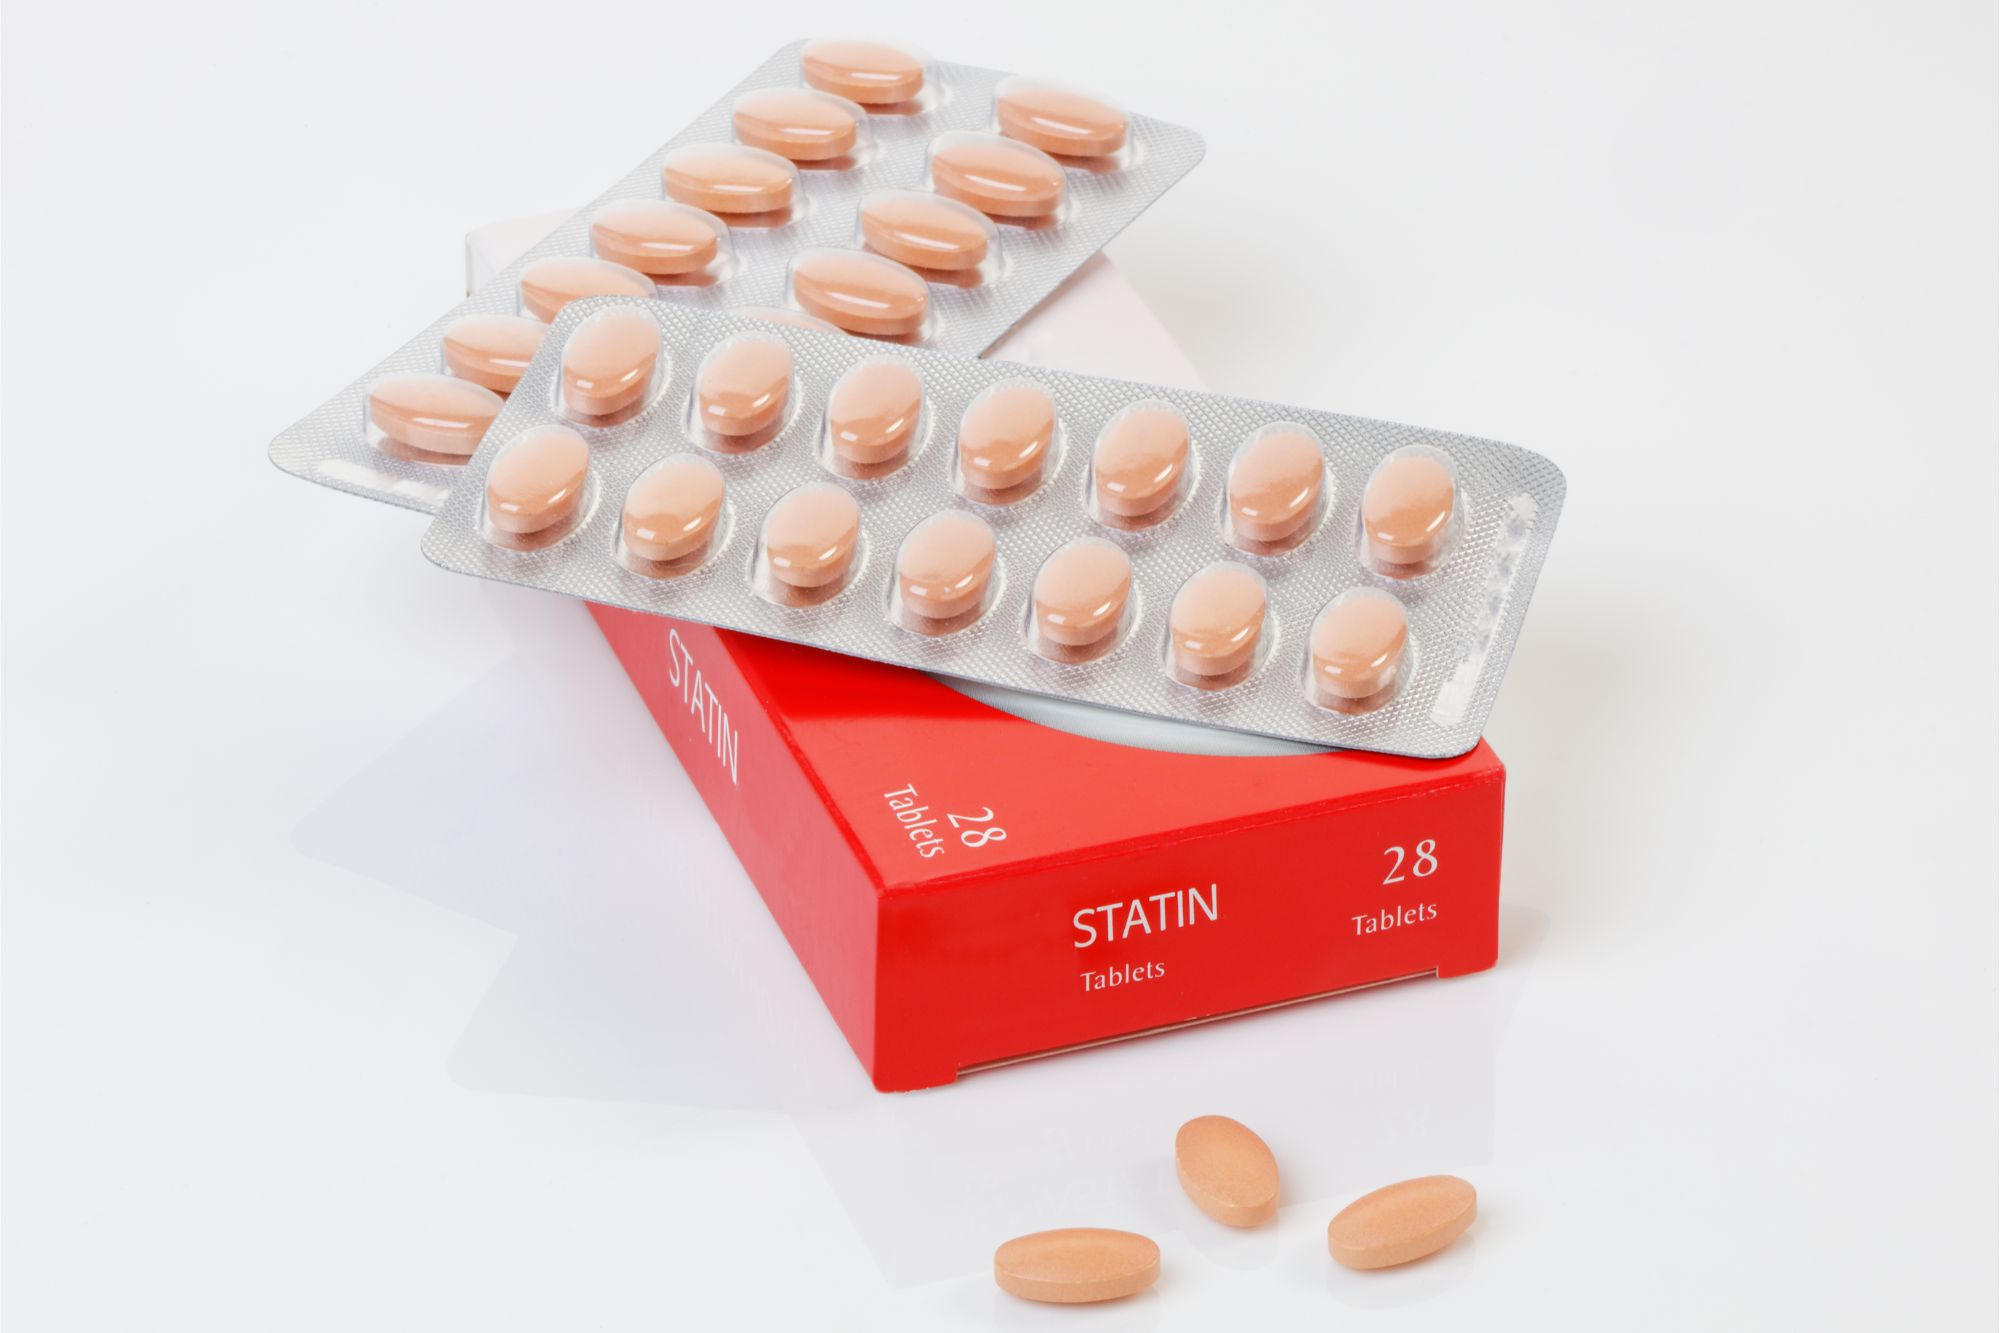 Scientists identify new potential benefits of statins beyond lowering cholesterol